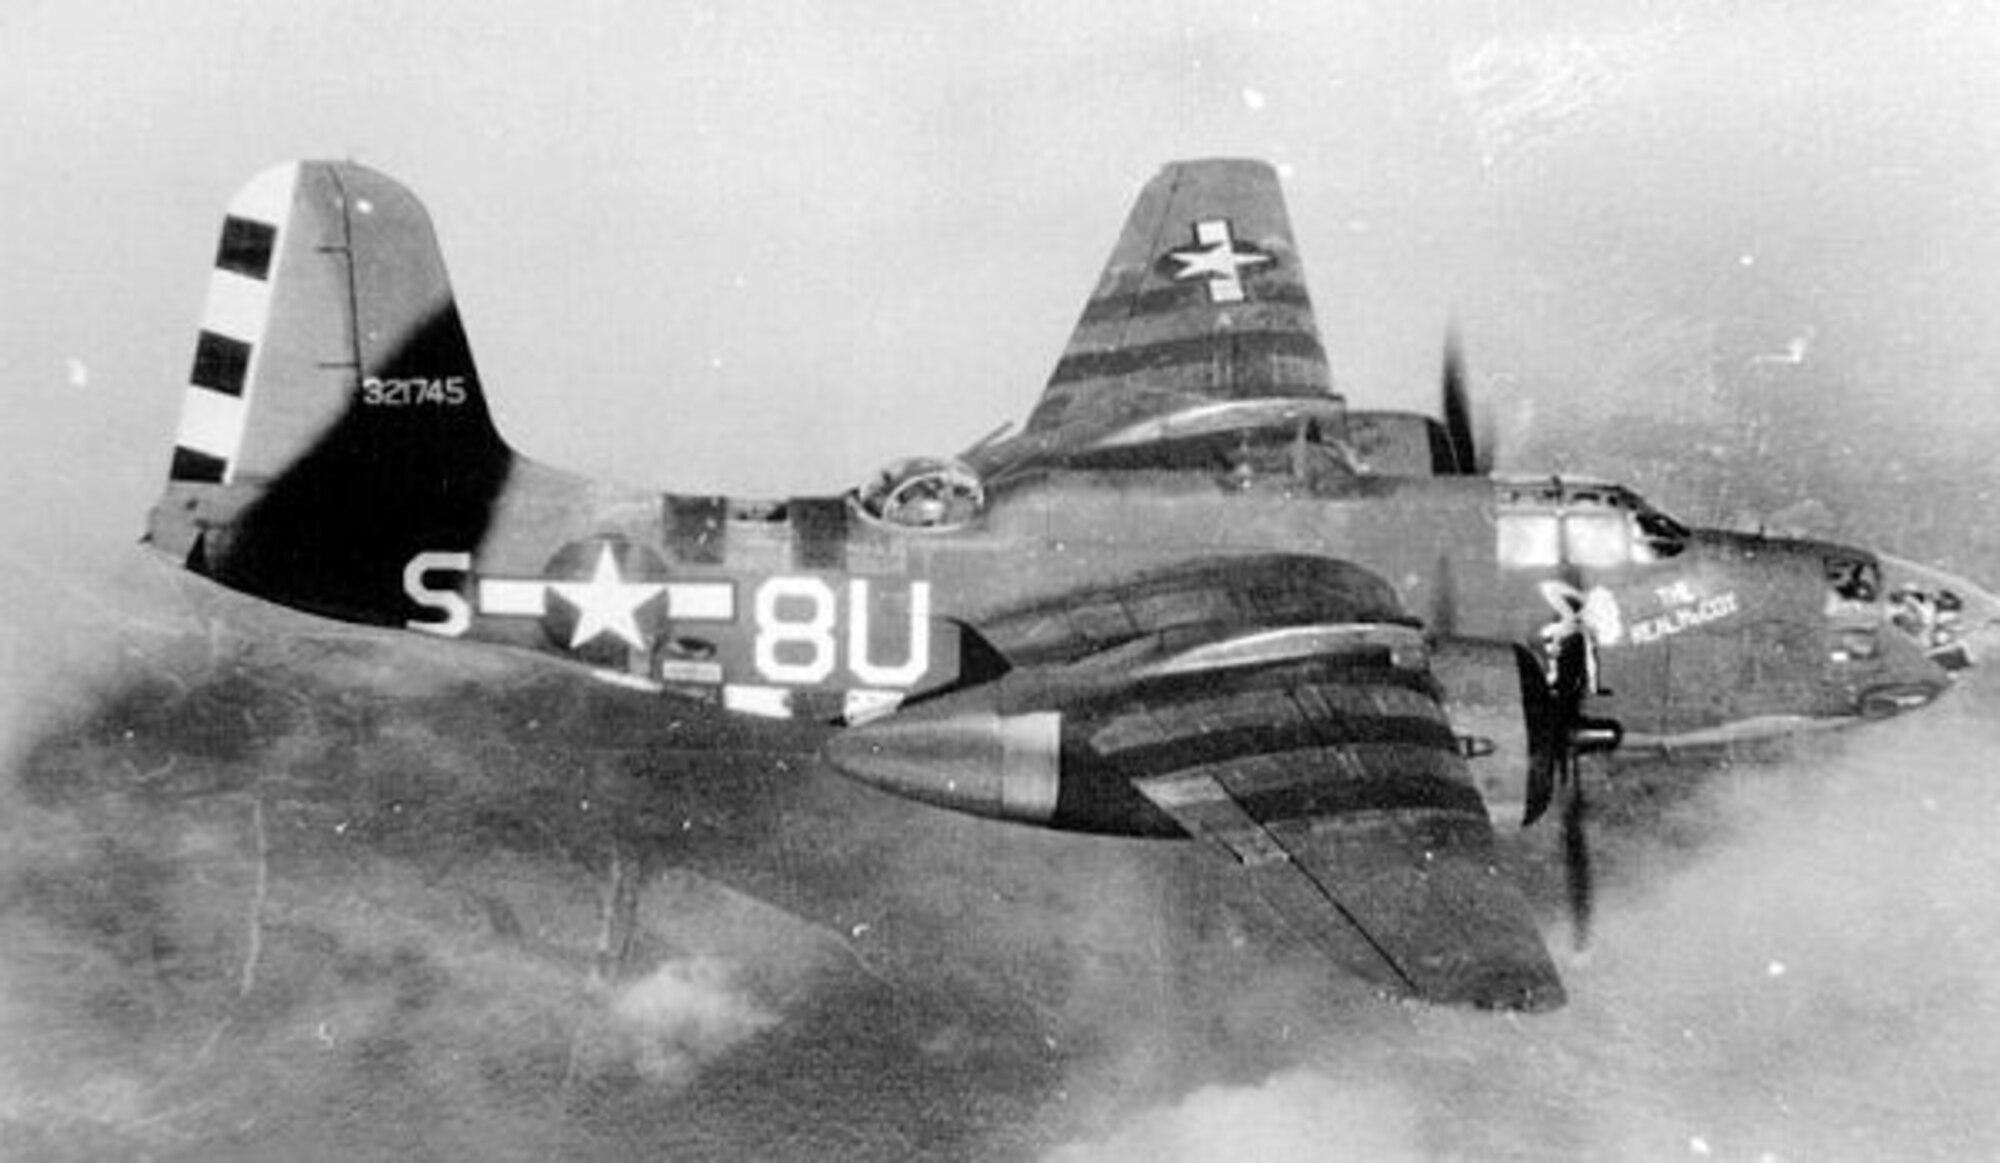 An A-20J Havoc attack bomber named “The Real McCoy” of Thad C. Williams’ 646th Bomb Squadron (Light, squadron code 8U) of the 410th Bomb Group (Light) is seen over a broken cloud deck late during World War II.  The A-20J featured am acrylic glass nose which allowed the aircraft to carry a bombardier and bombsight (seen in the photo) and serve as a formation leader in bombing missions, especially for the more numerous gun-nosed version of the Havoc bombers.  The serial number for this aircraft, 43-21745, is only a few numbers away from the A-20J that Thad Williams flew on his last combat mission, 43-21740.  This picture was taken some time after D-Day as the recognition stripes atop the aircraft have been painted out.  (USAF Photo)